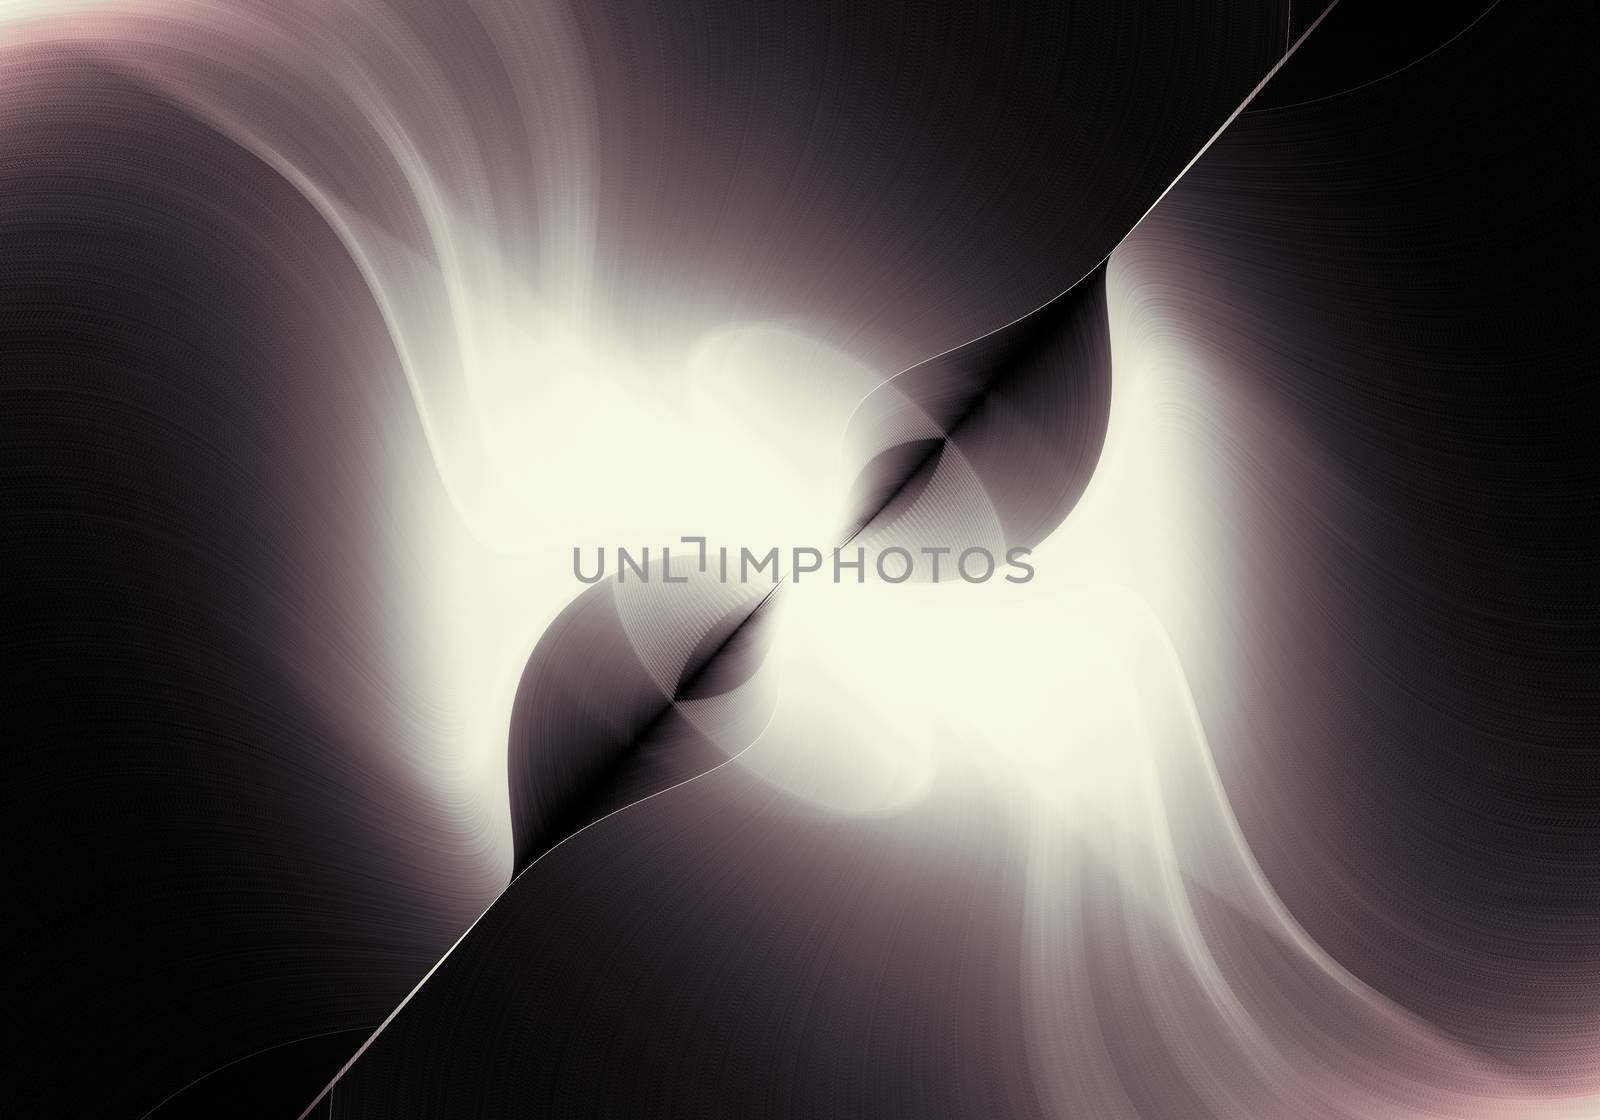 Fractal image: on a black background depict whimsical lines, reminiscent of a sleeping person.